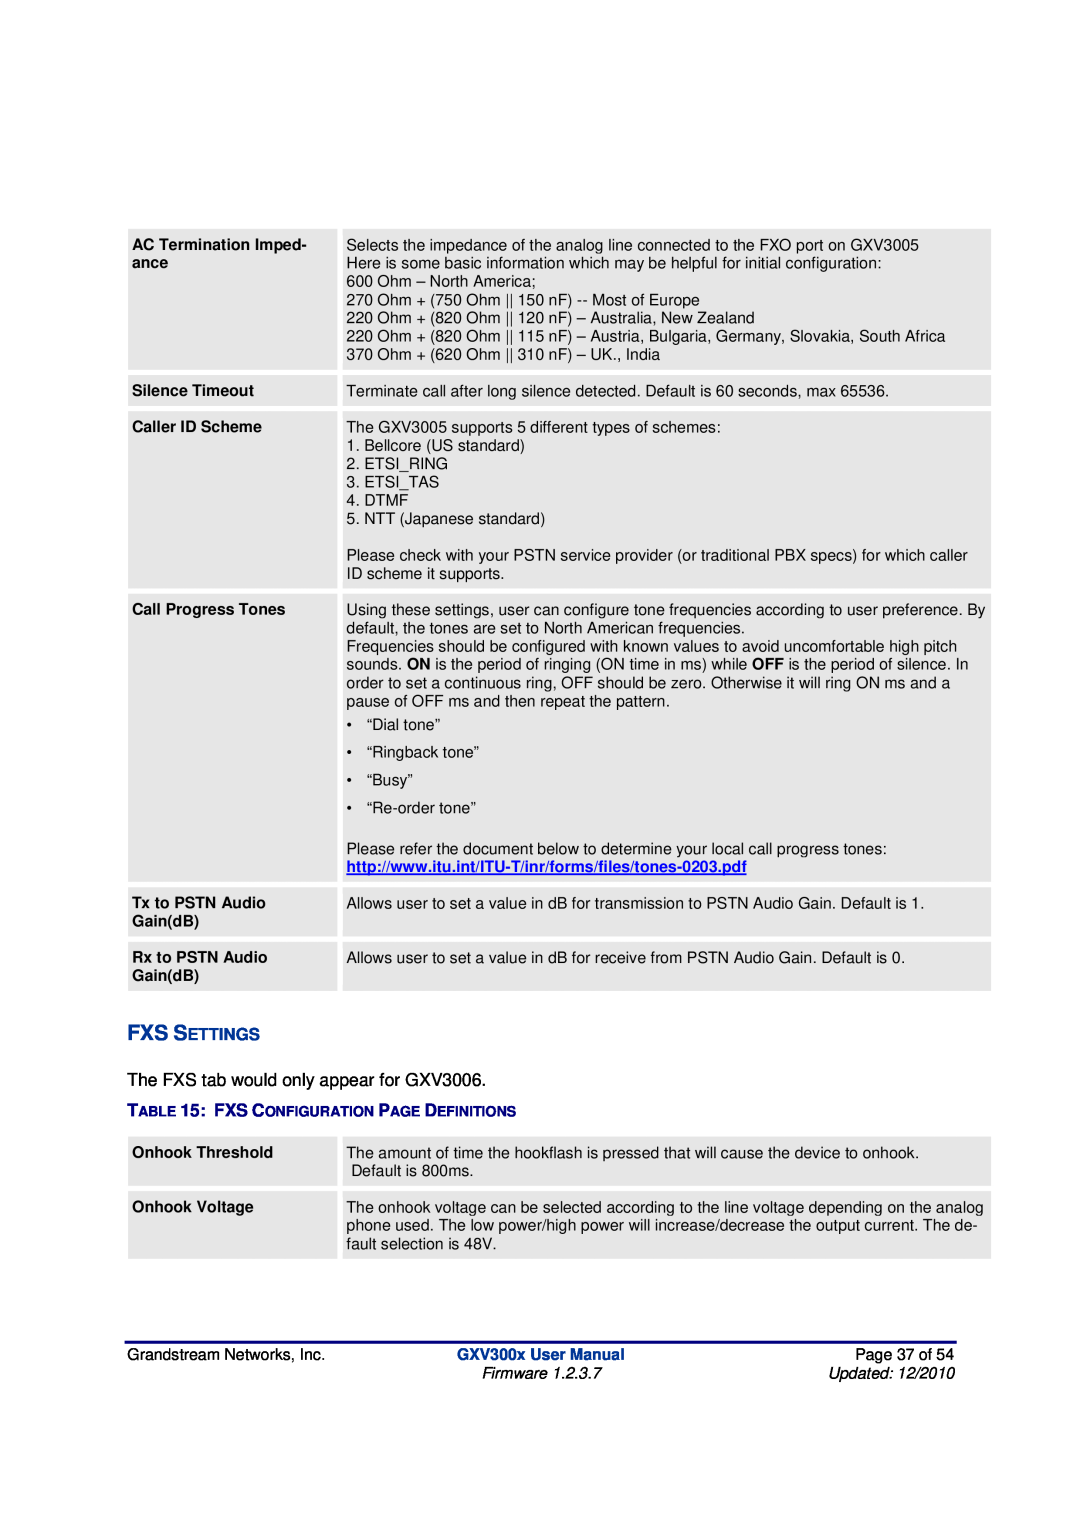 Grandstream Networks GXV300X manual The FXS tab would only appear for GXV3006, Fxs Settings, Grandstream Networks, Inc 